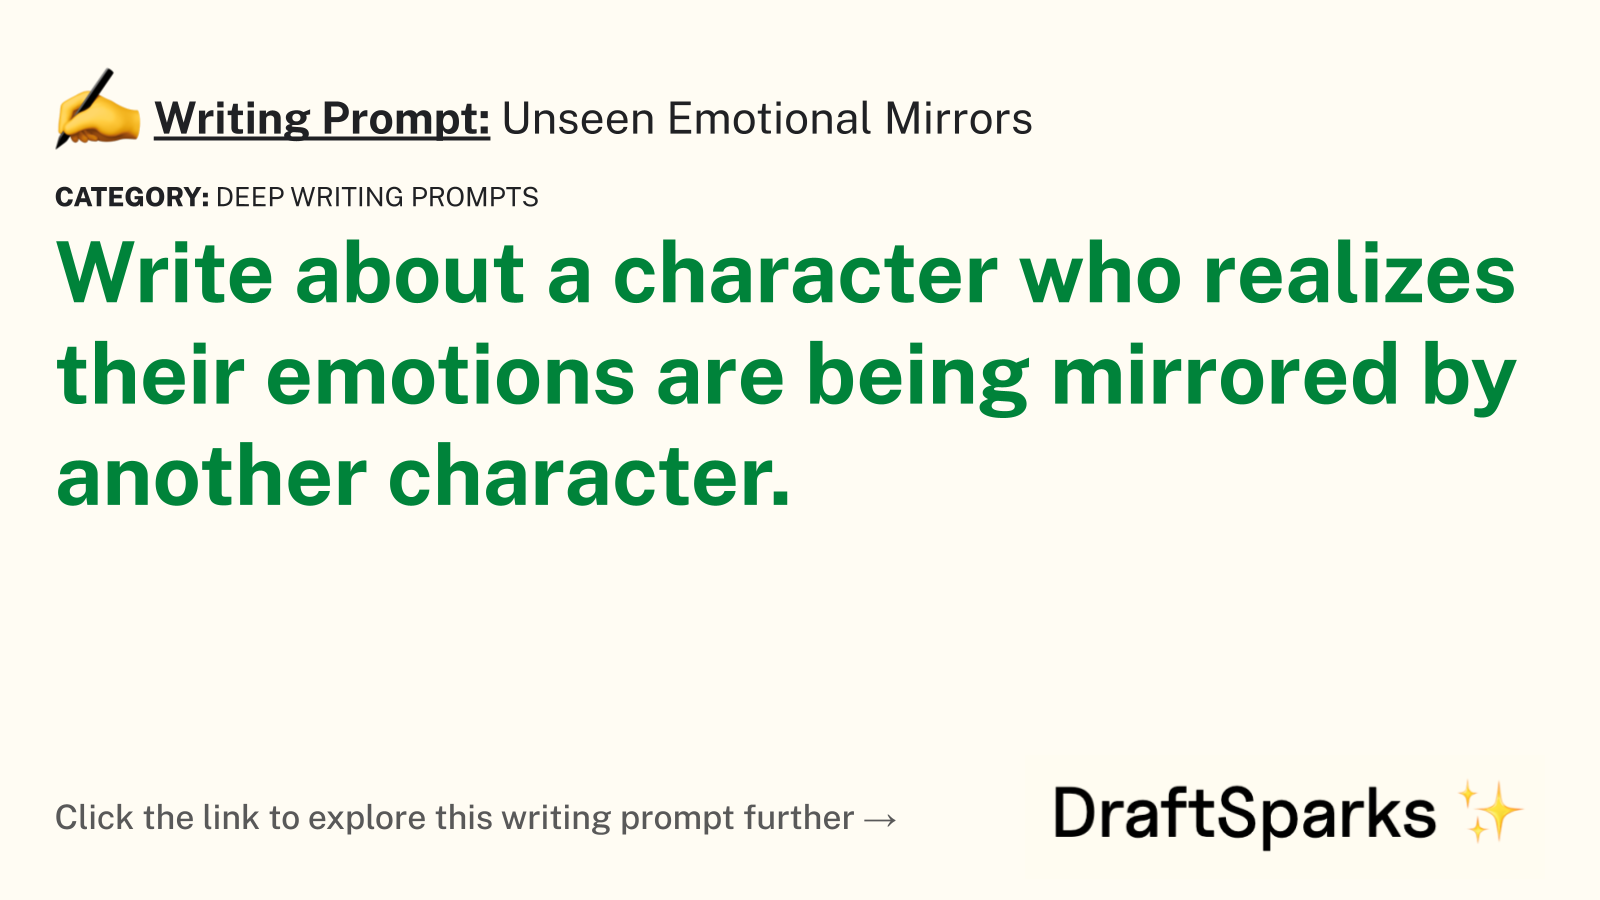 Unseen Emotional Mirrors